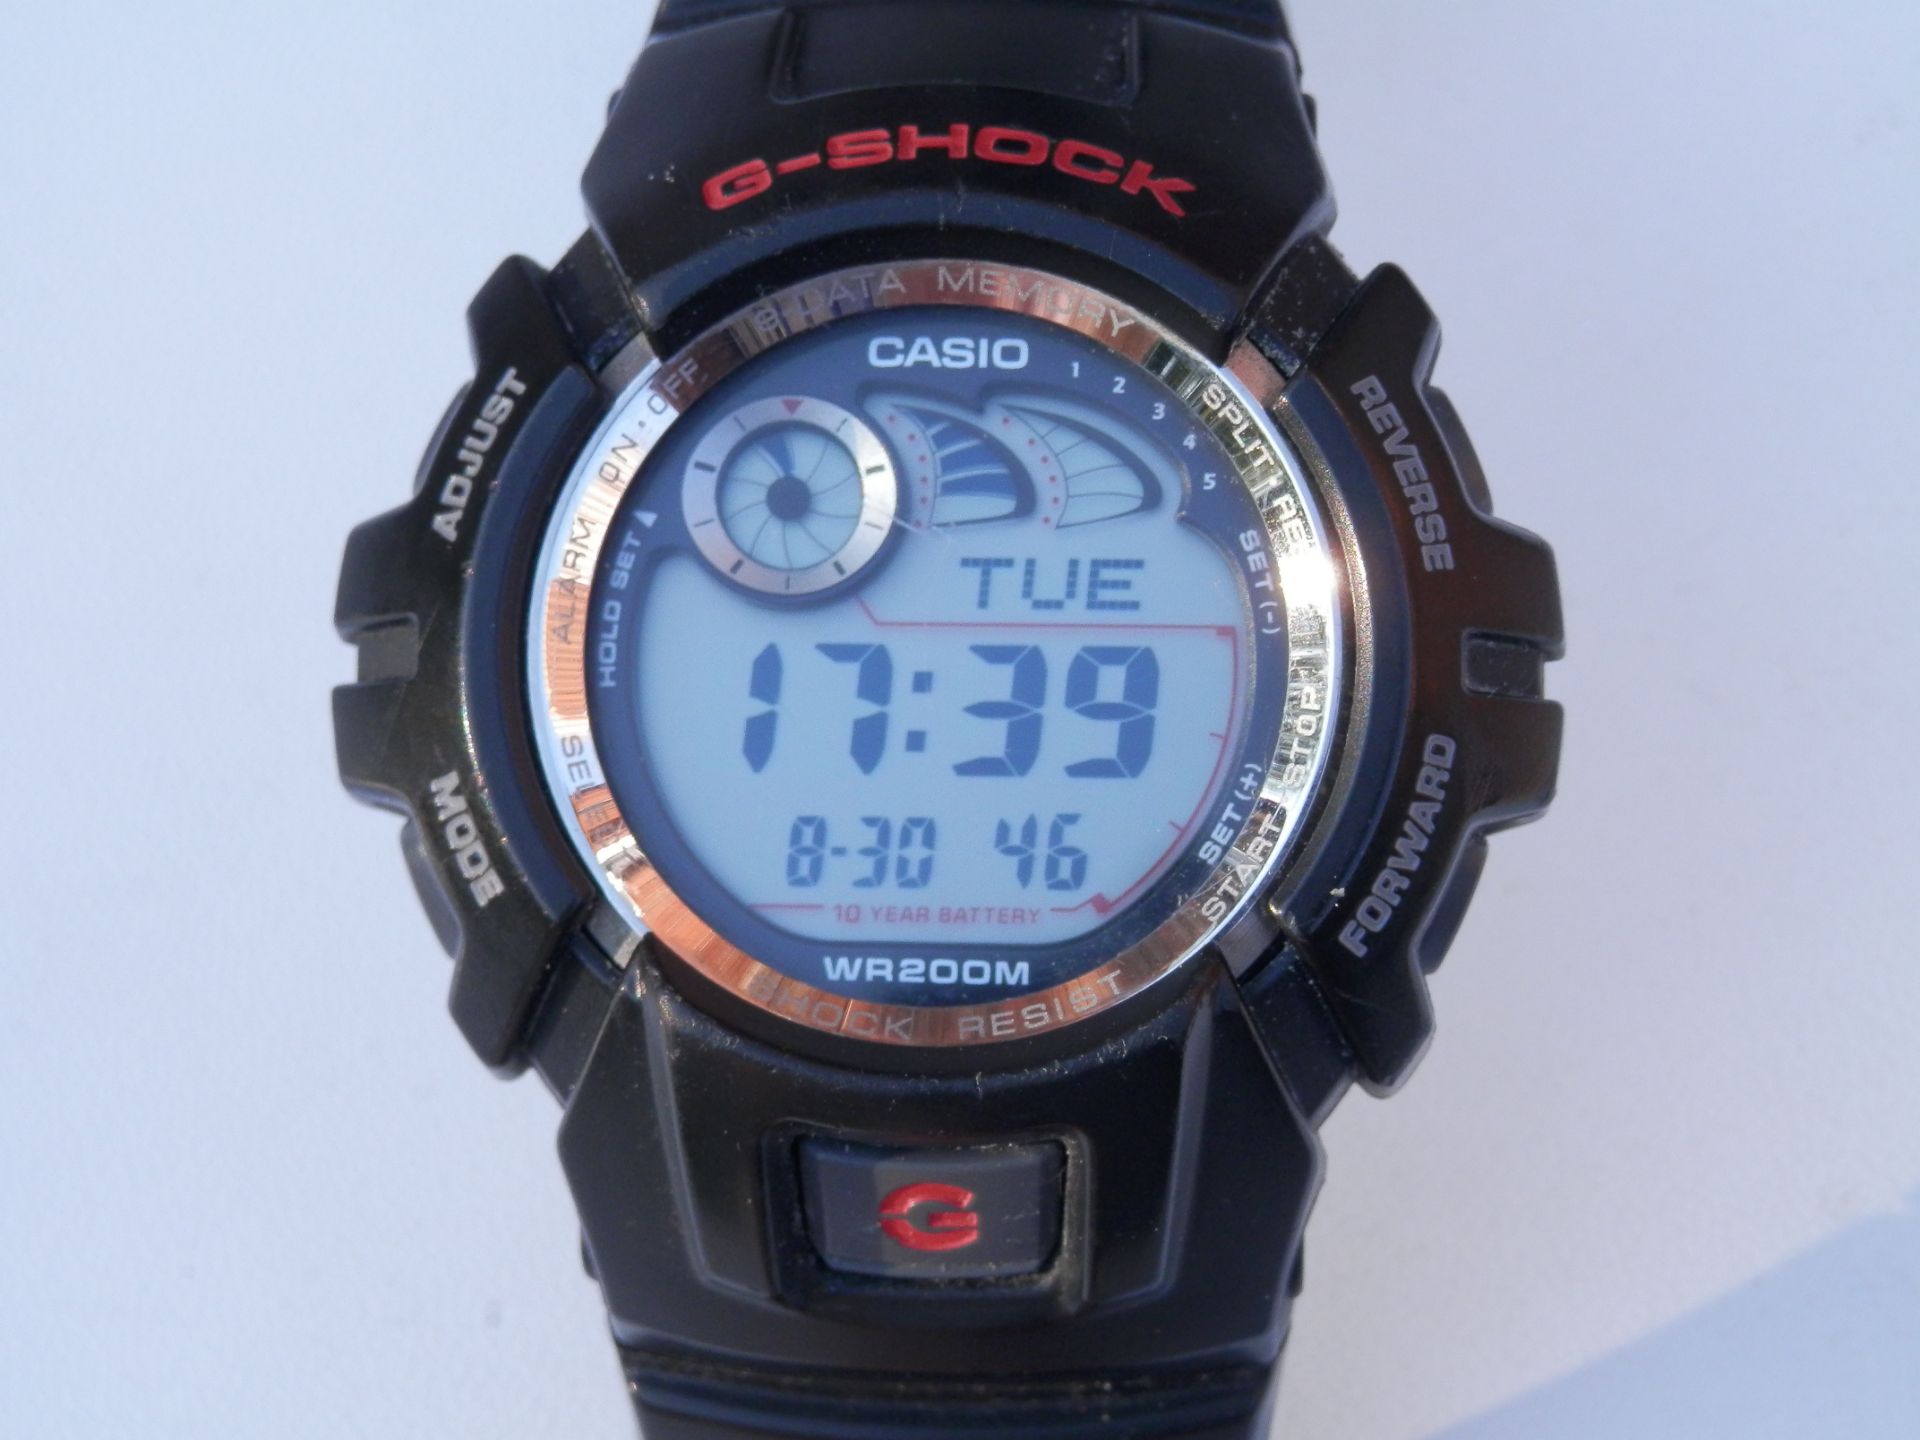 GENTS CASIO G-SHOCK 2900G 200 METRE DIGITAL SPORTS WATCH, ALL WORKING. GREAT WATCH RRP £89.99 - Image 3 of 9